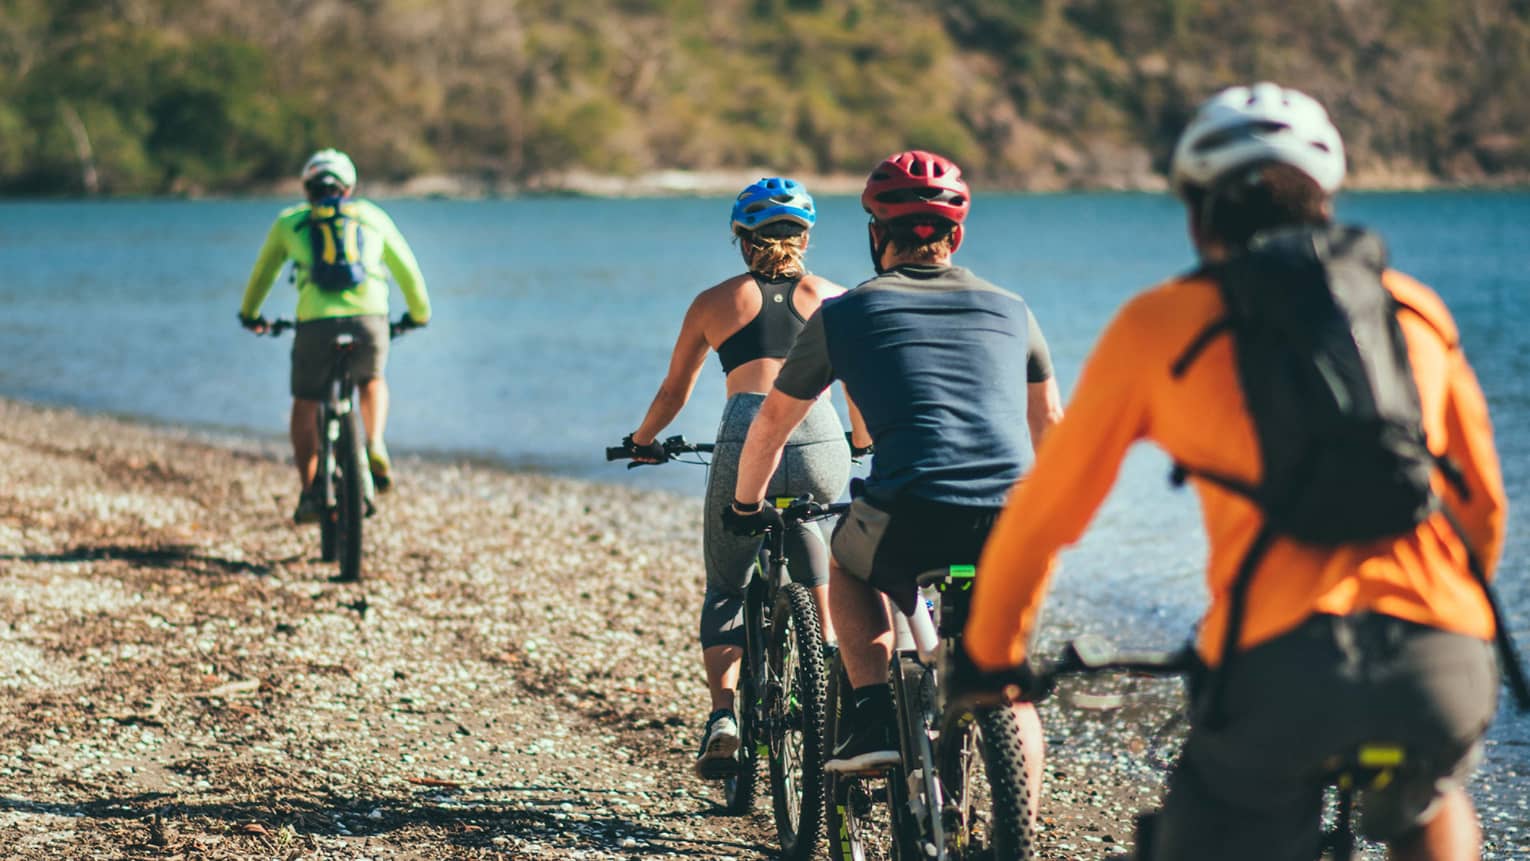 Four people riding bicycles through a rocky terrain next to the ocean